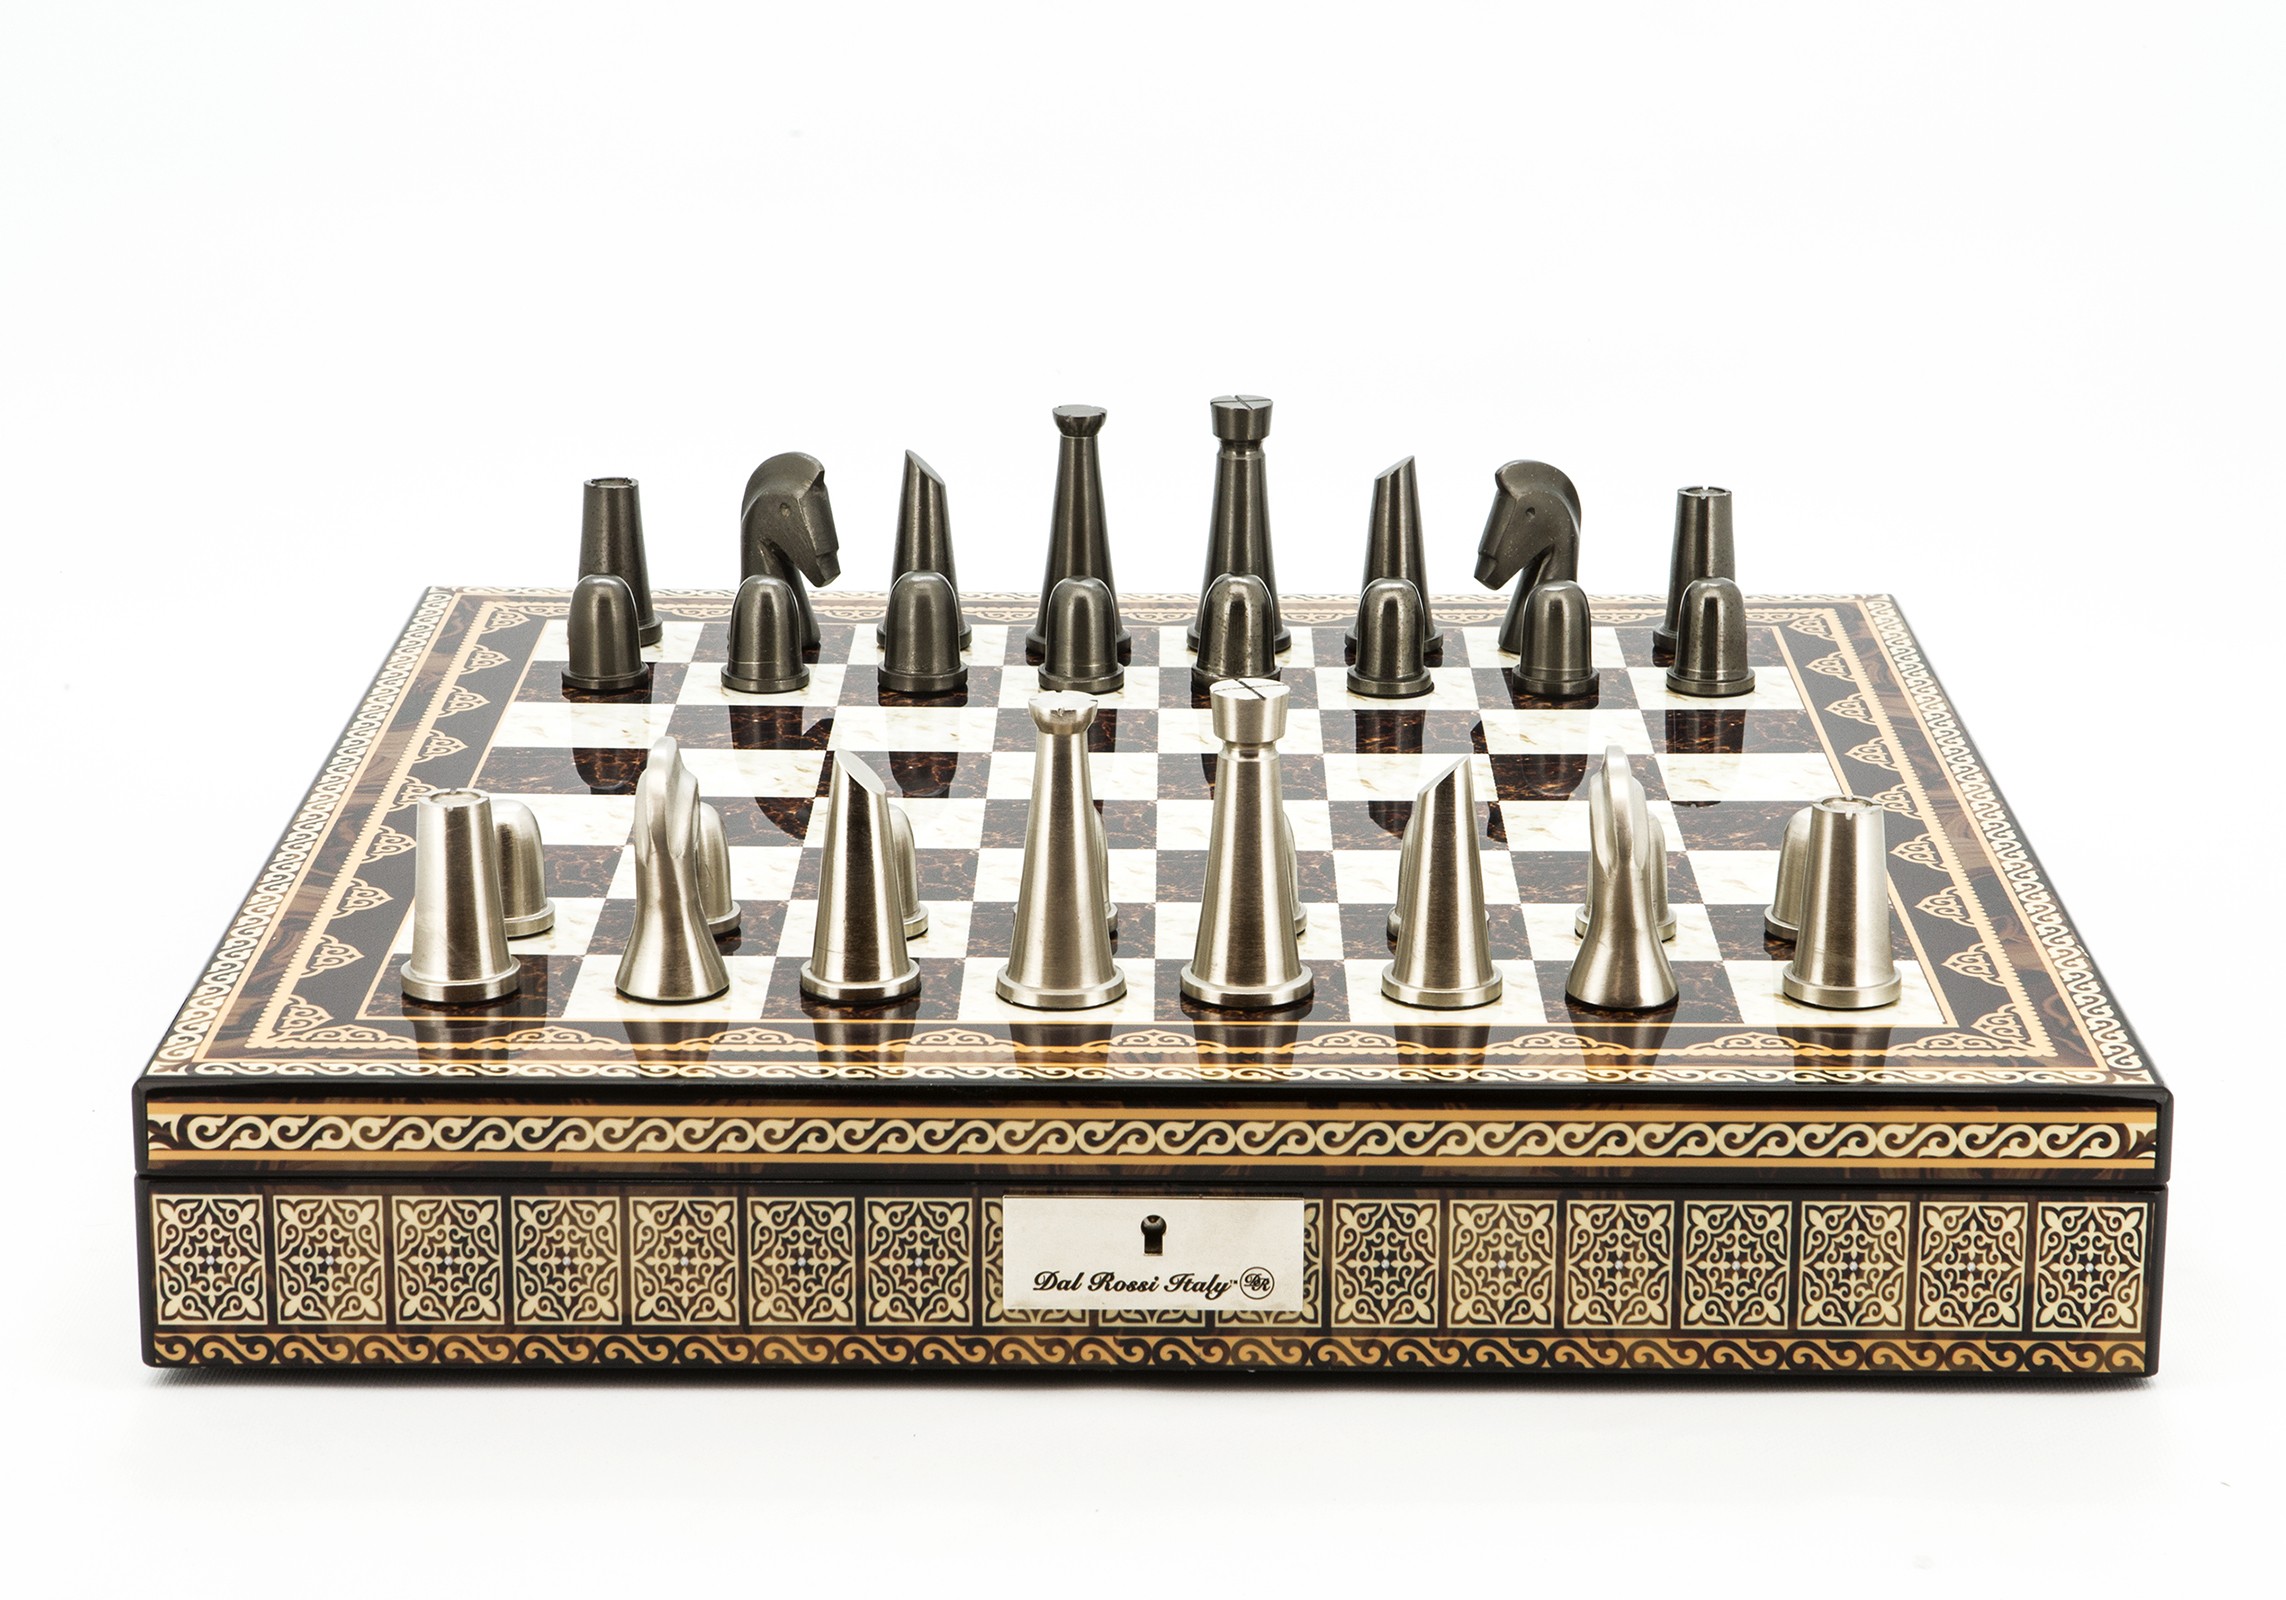 Dal Rossi Italy Chess Set Mosaic Shinny Finish 20″ With Compartments, With Metal Dark Titanium and Silver chessmen 85mm